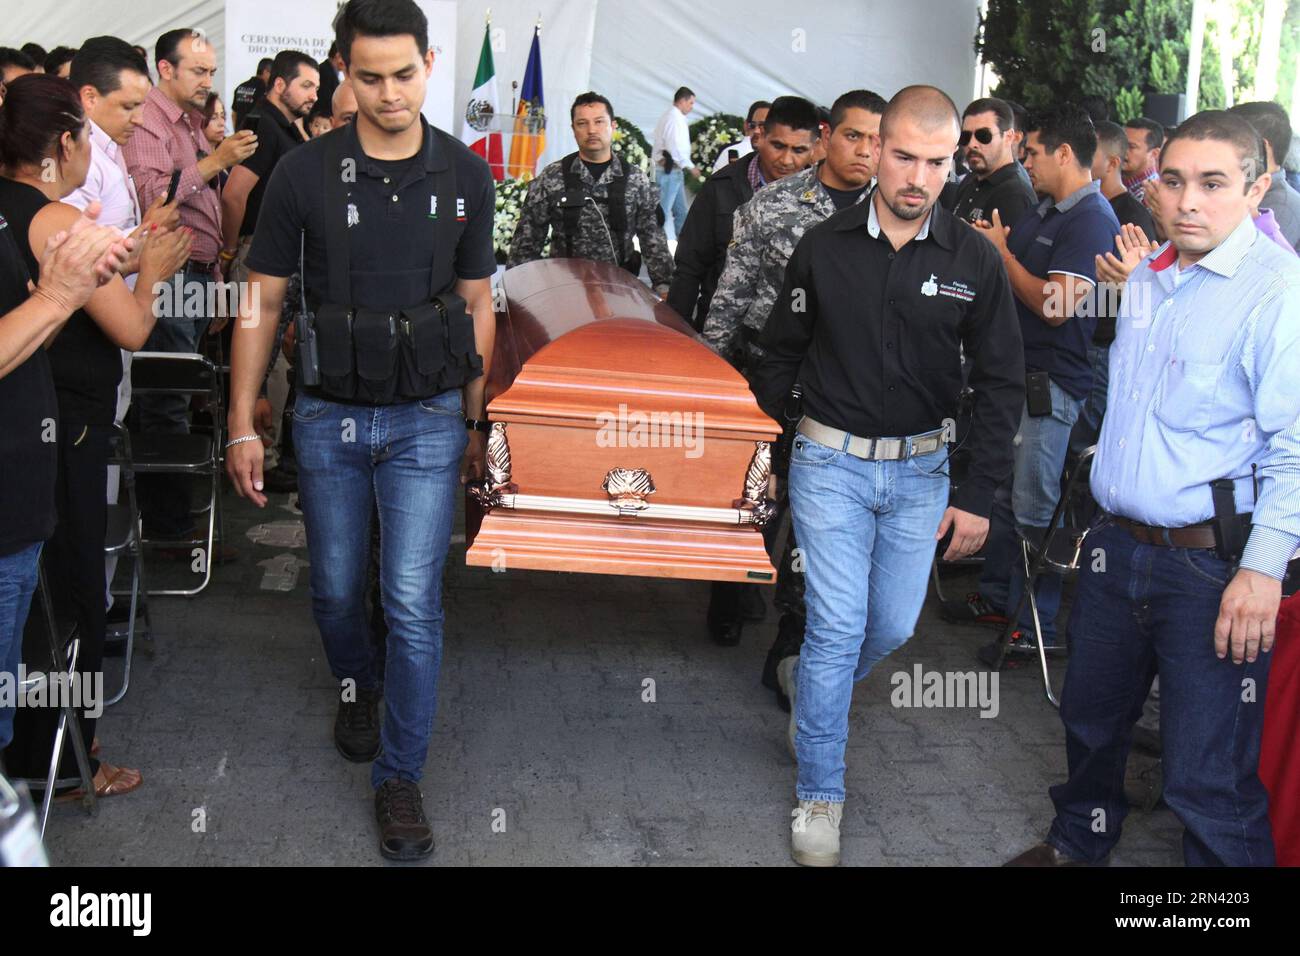 People carry the coffin of Mario Alberto Jorge Olivares Castorena, a policeman that died in the violent acts on Friday, during his funeral in Guadalajara, Jalisco state, Mexico, on May 2, 2015. According to local press, At least seven people were killed and 19 others injured during an outbreak of violence early Friday in parts of Mexico s western state of Jalisco, where local government launched an operation against a drug cartel. Str) (da) MEXICO-JALISCO-SECURITY-VIOLENCE e STR PUBLICATIONxNOTxINxCHN   Celebrities Carry The Coffin of Mario Alberto Jorge Olivares  a Policeman Thatcher died in Stock Photo